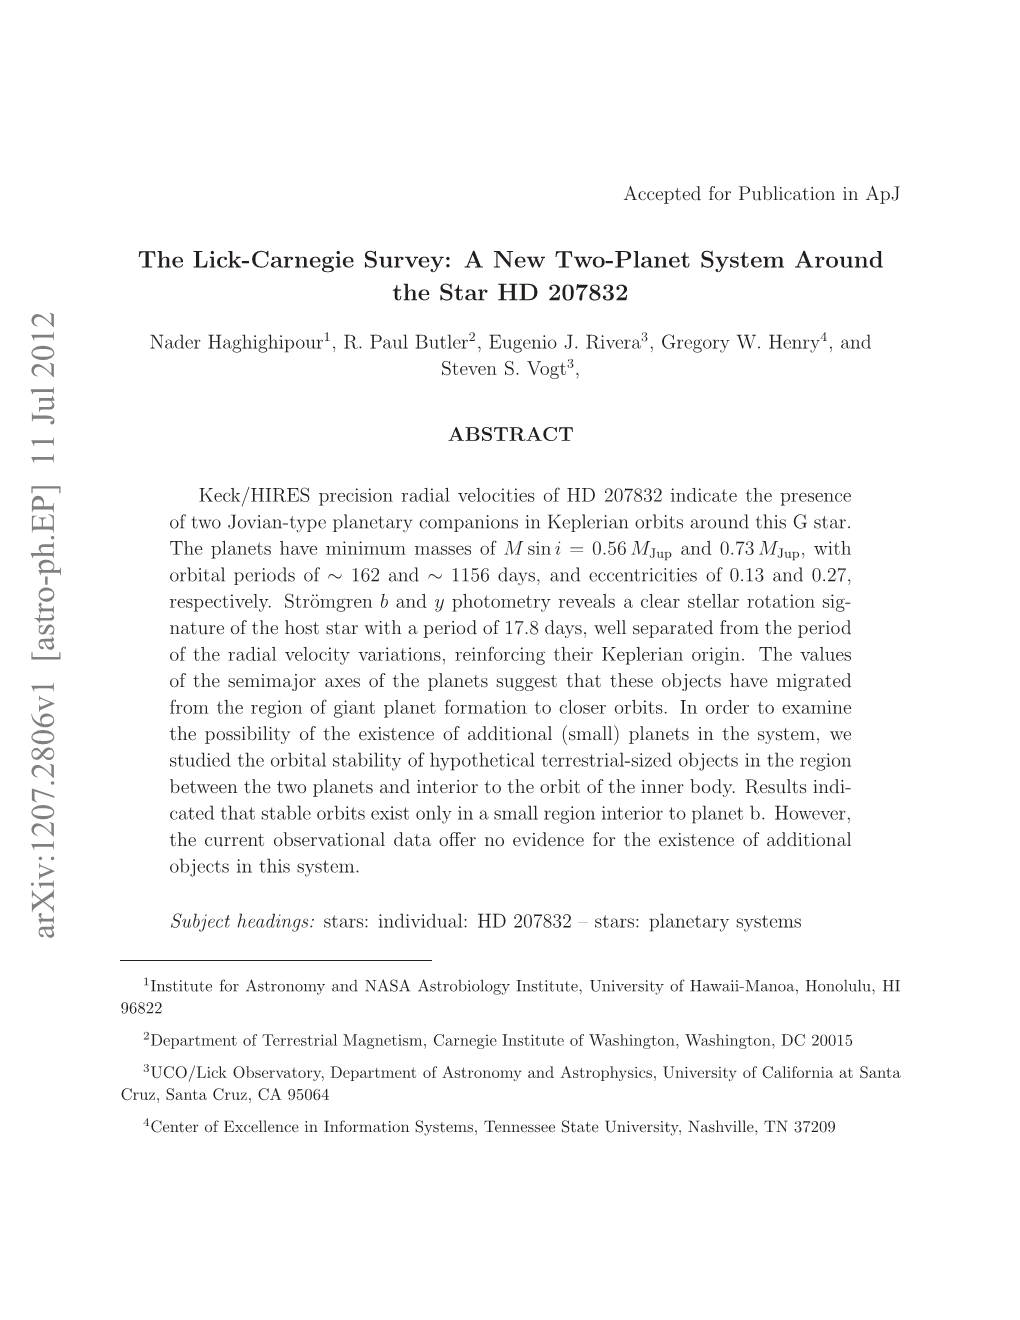 The Lick-Carnegie Survey: a New Two-Planet System Around the Star HD 207832